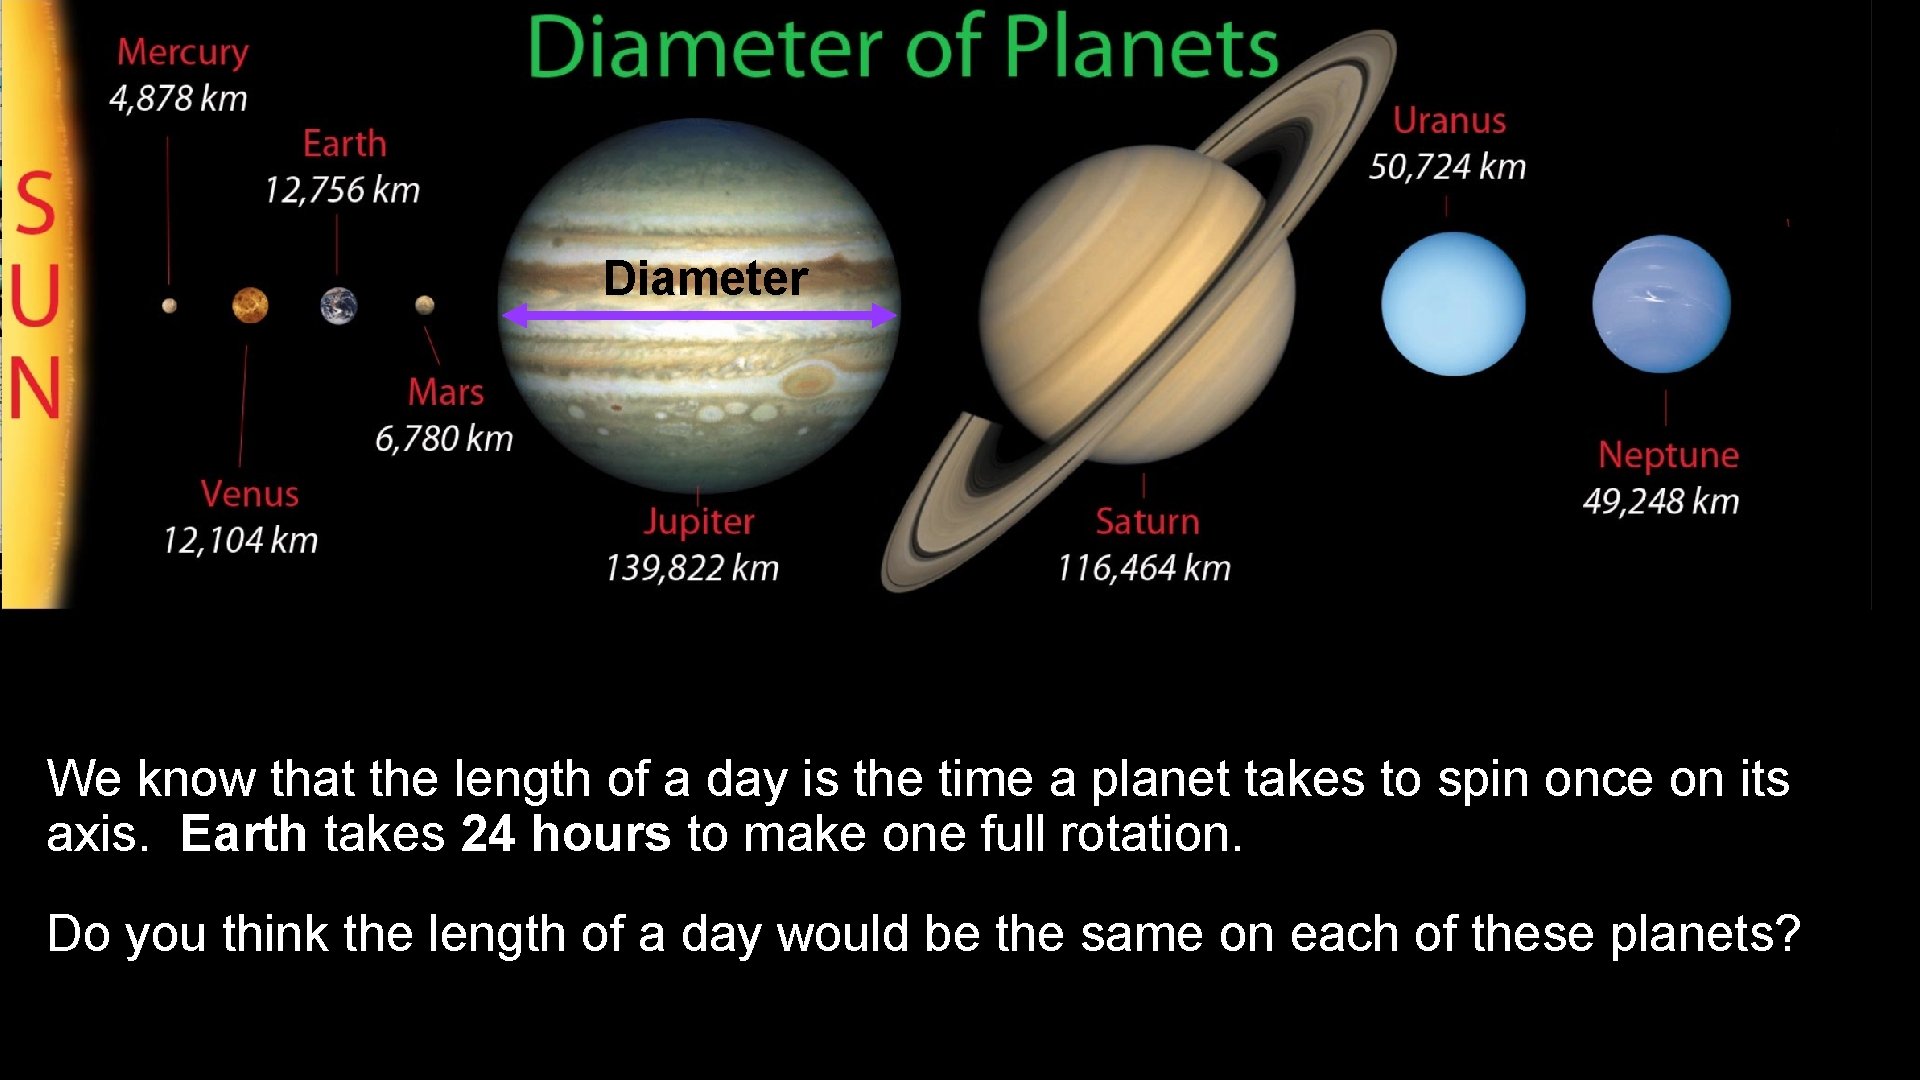 Diameter We know that the length of a day is the time a planet